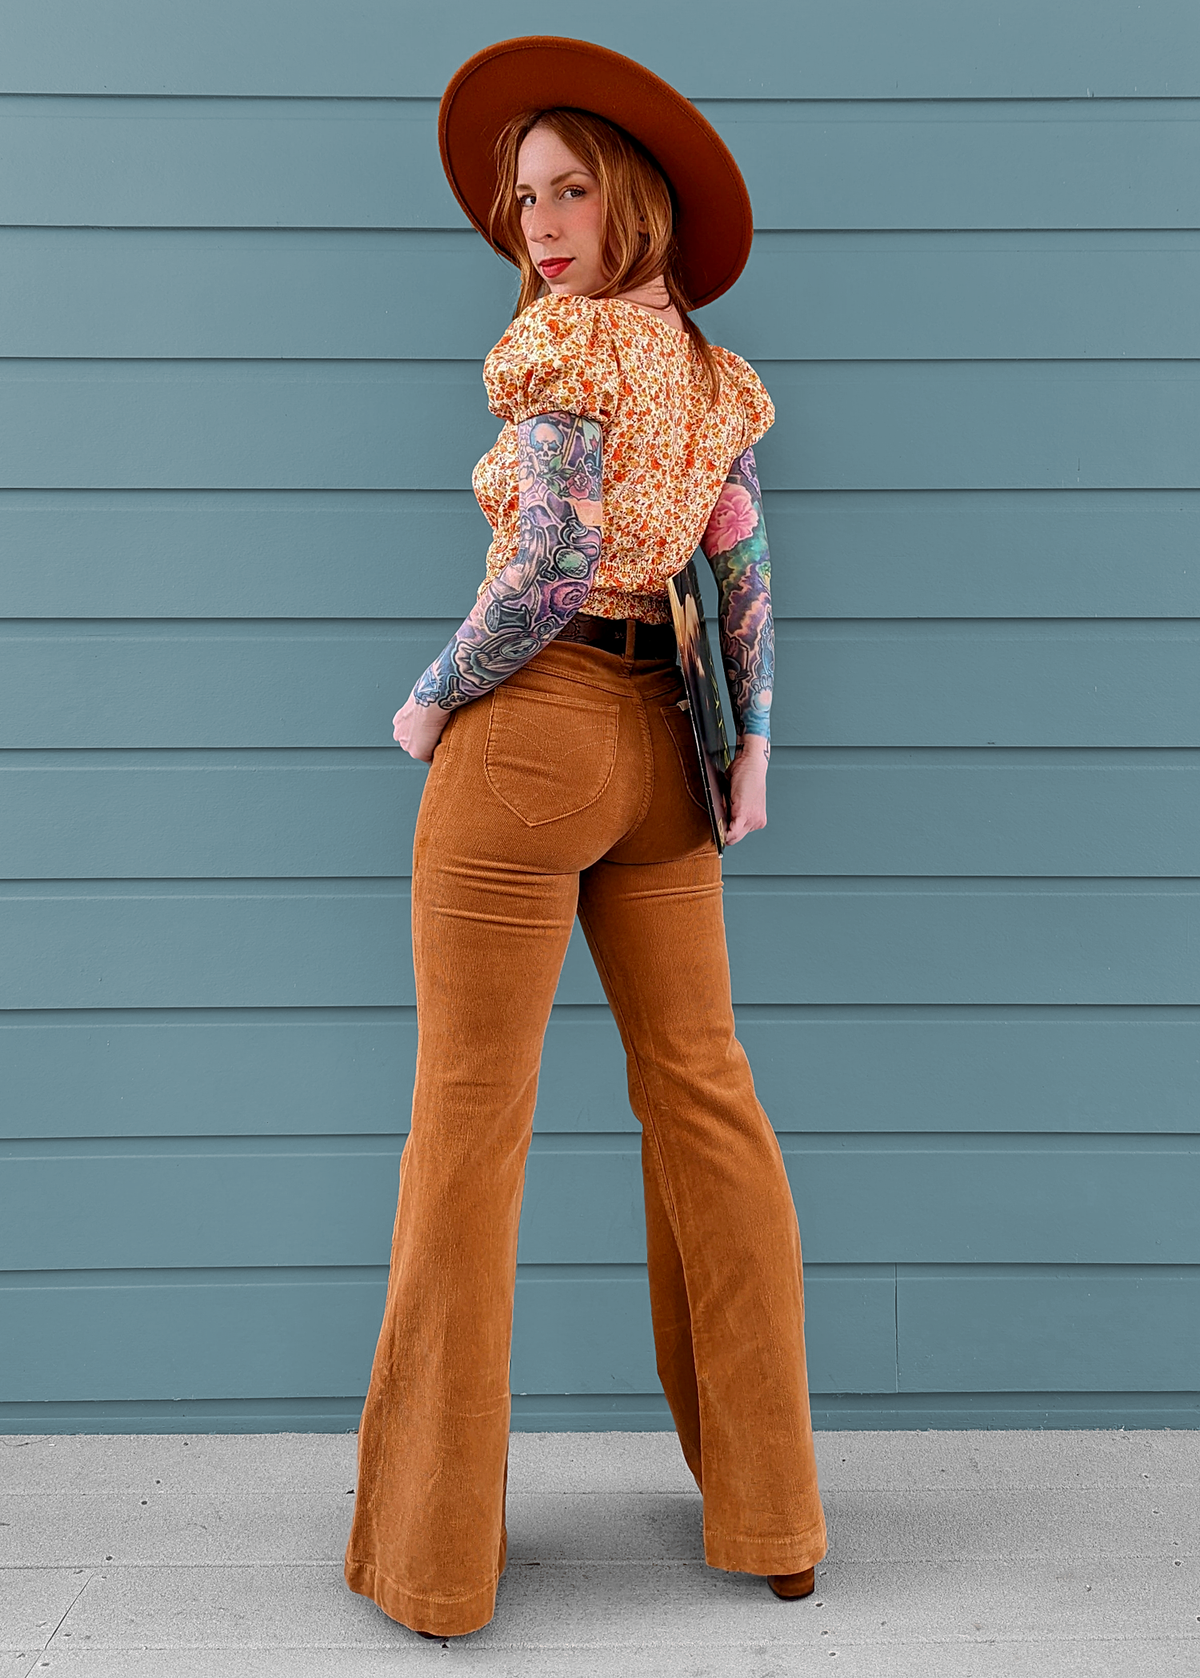 Rolla's Jeans Tan Corduroy Eastcoast Flare: 70s inspired with a high rise waist, velvety soft and stretchy thin wale corduroy, and a flare leg